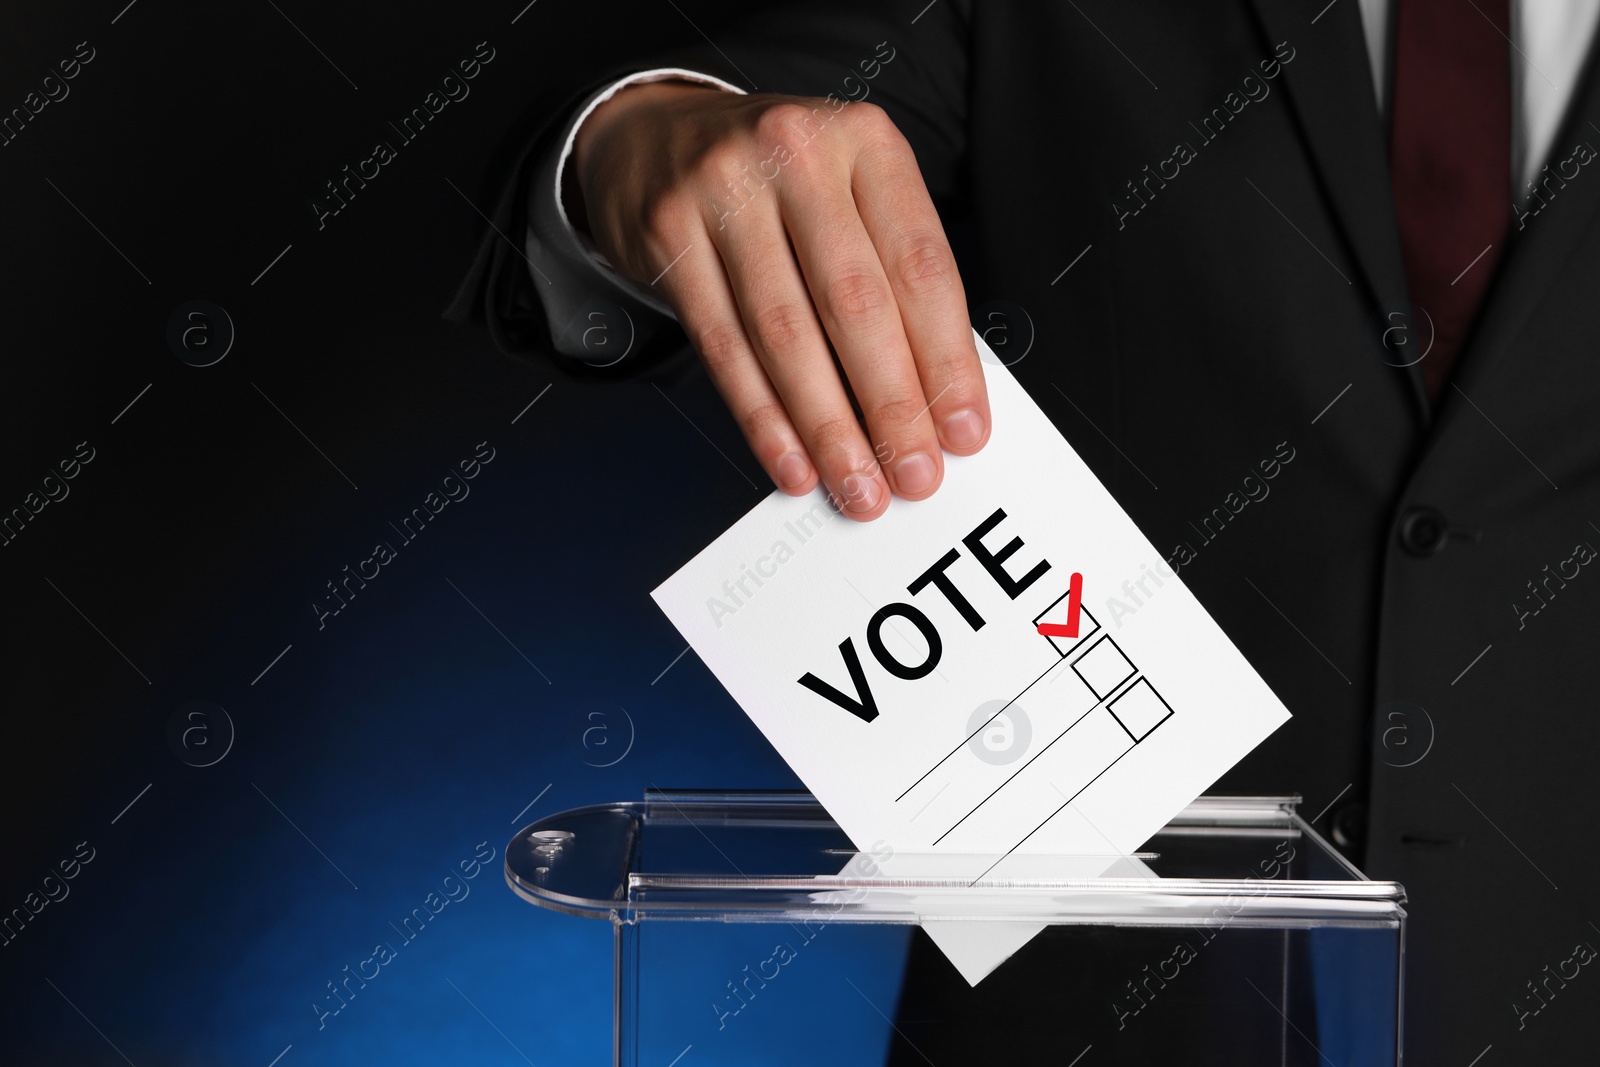 Image of Man putting paper with word Vote and tick into ballot box on dark blue background